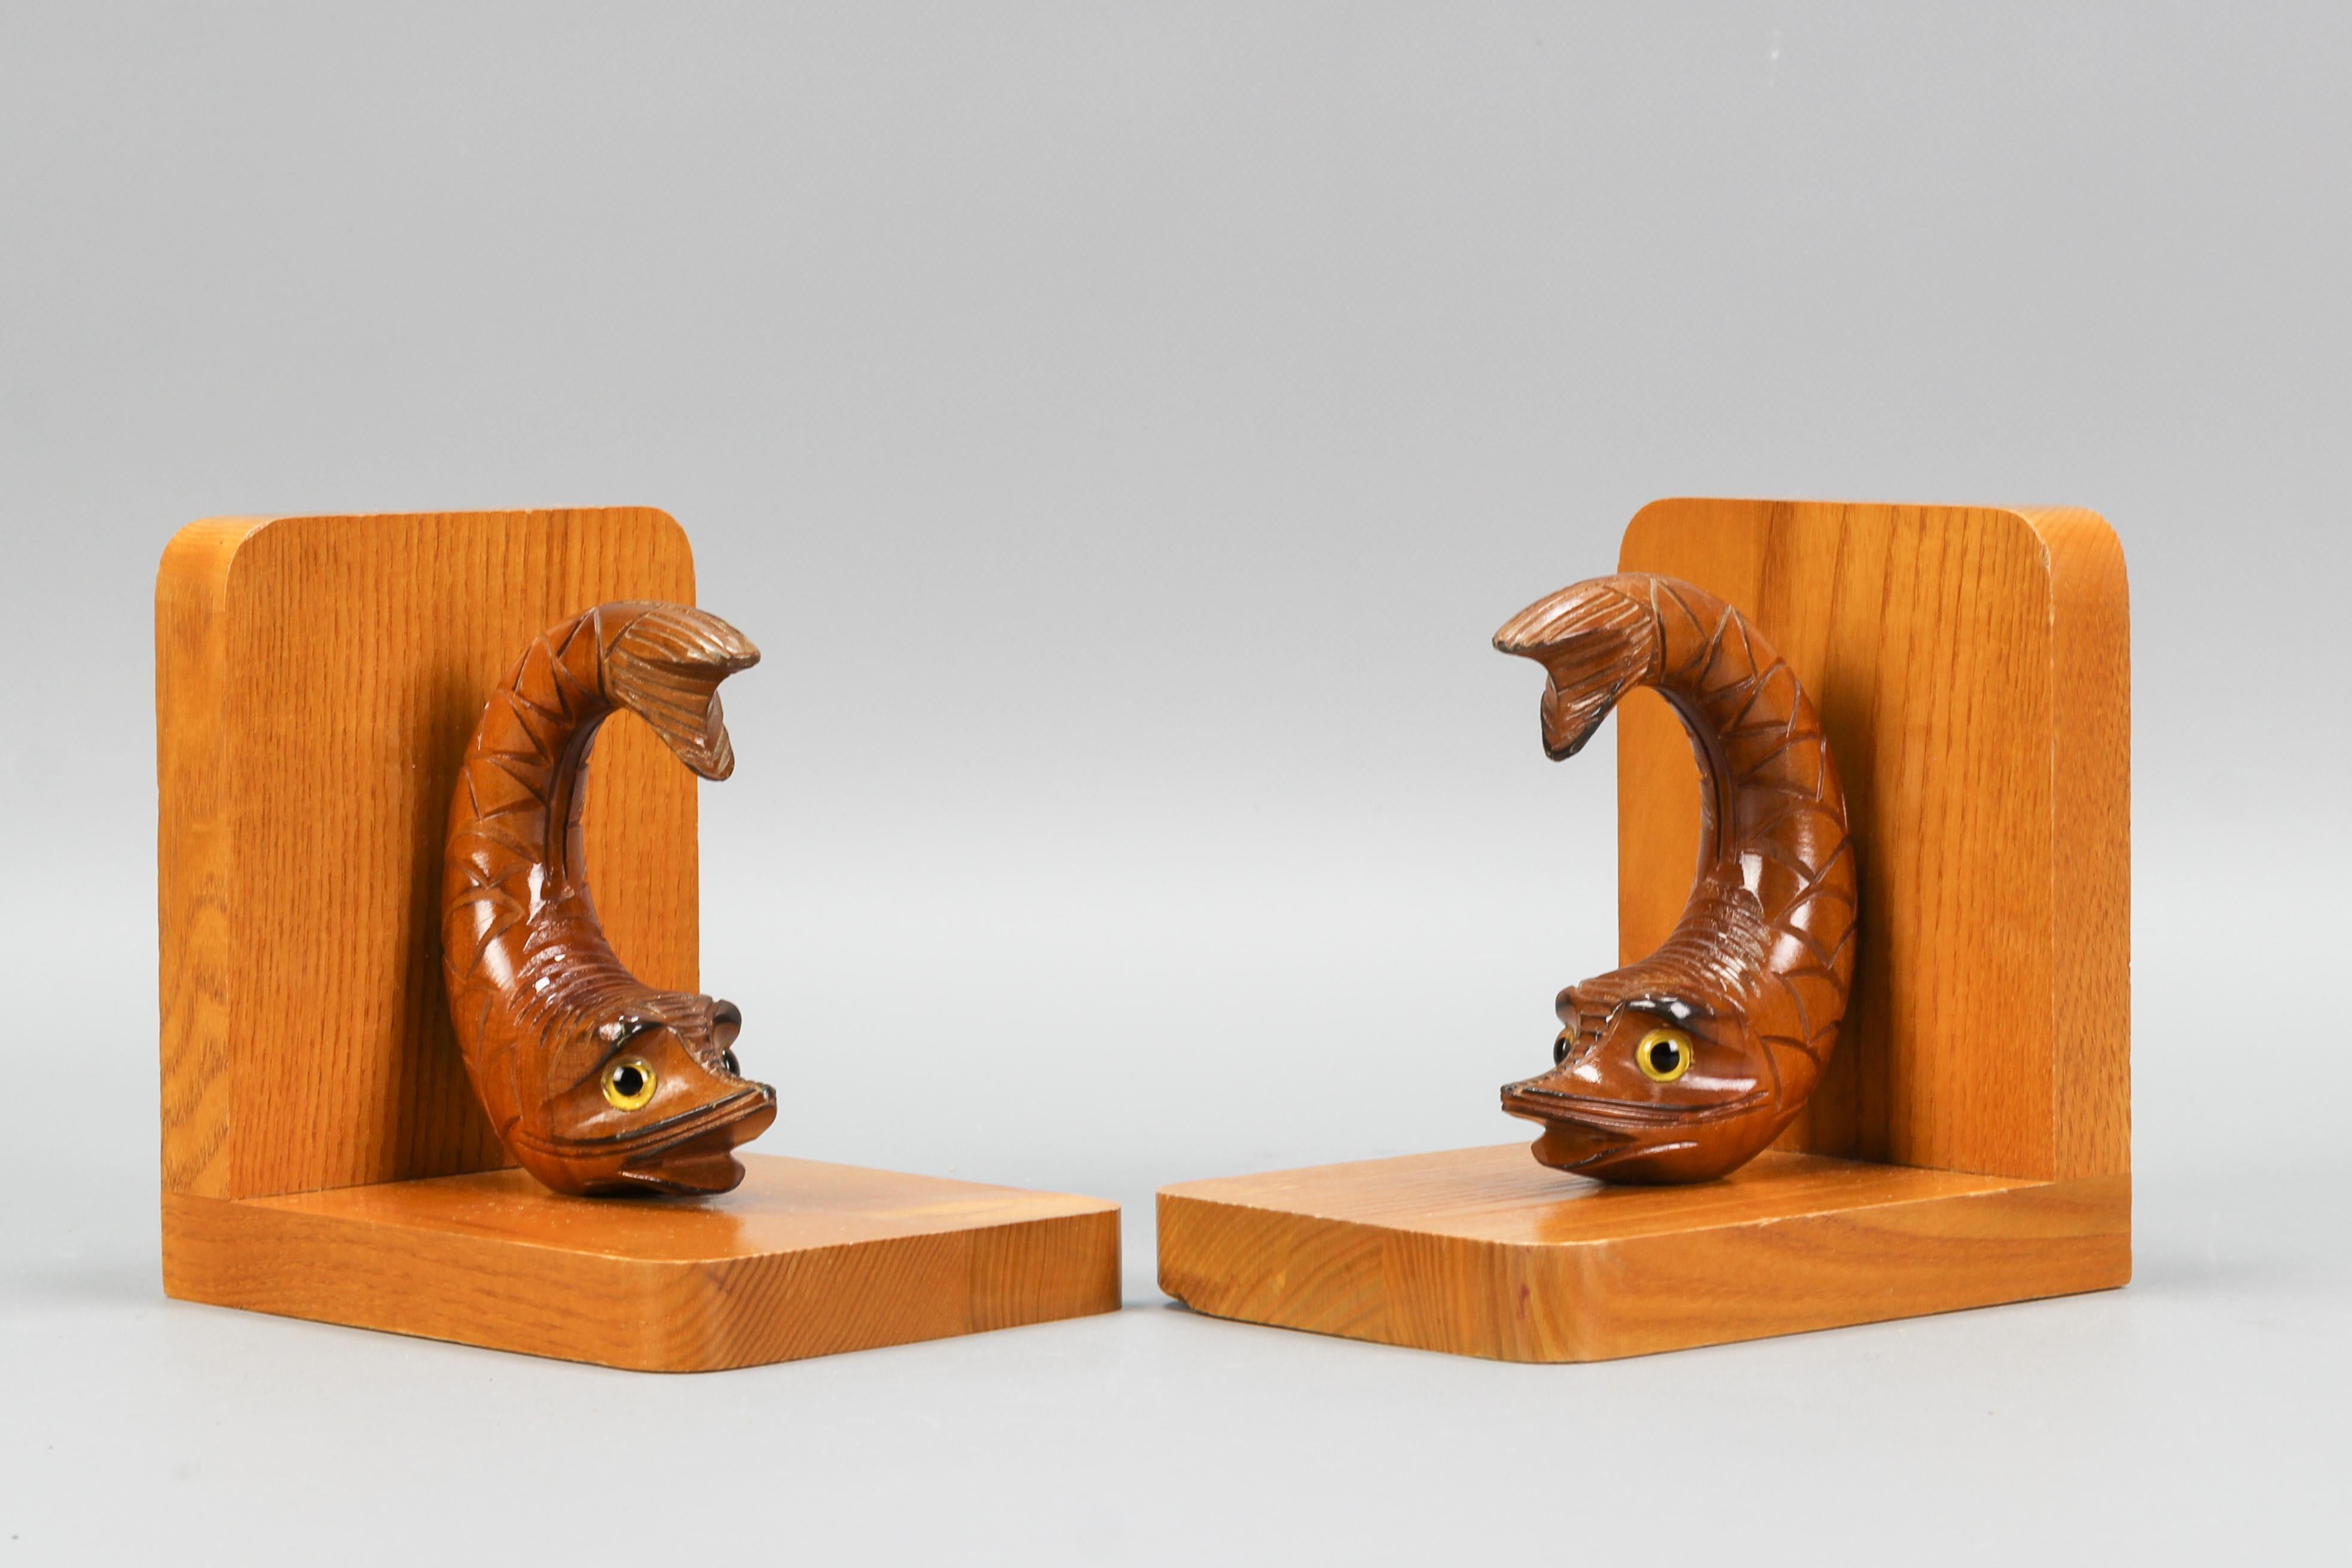 Pair of Hand Carved Wooden Bookends Sturgeons, Germany, 1970s For Sale 4